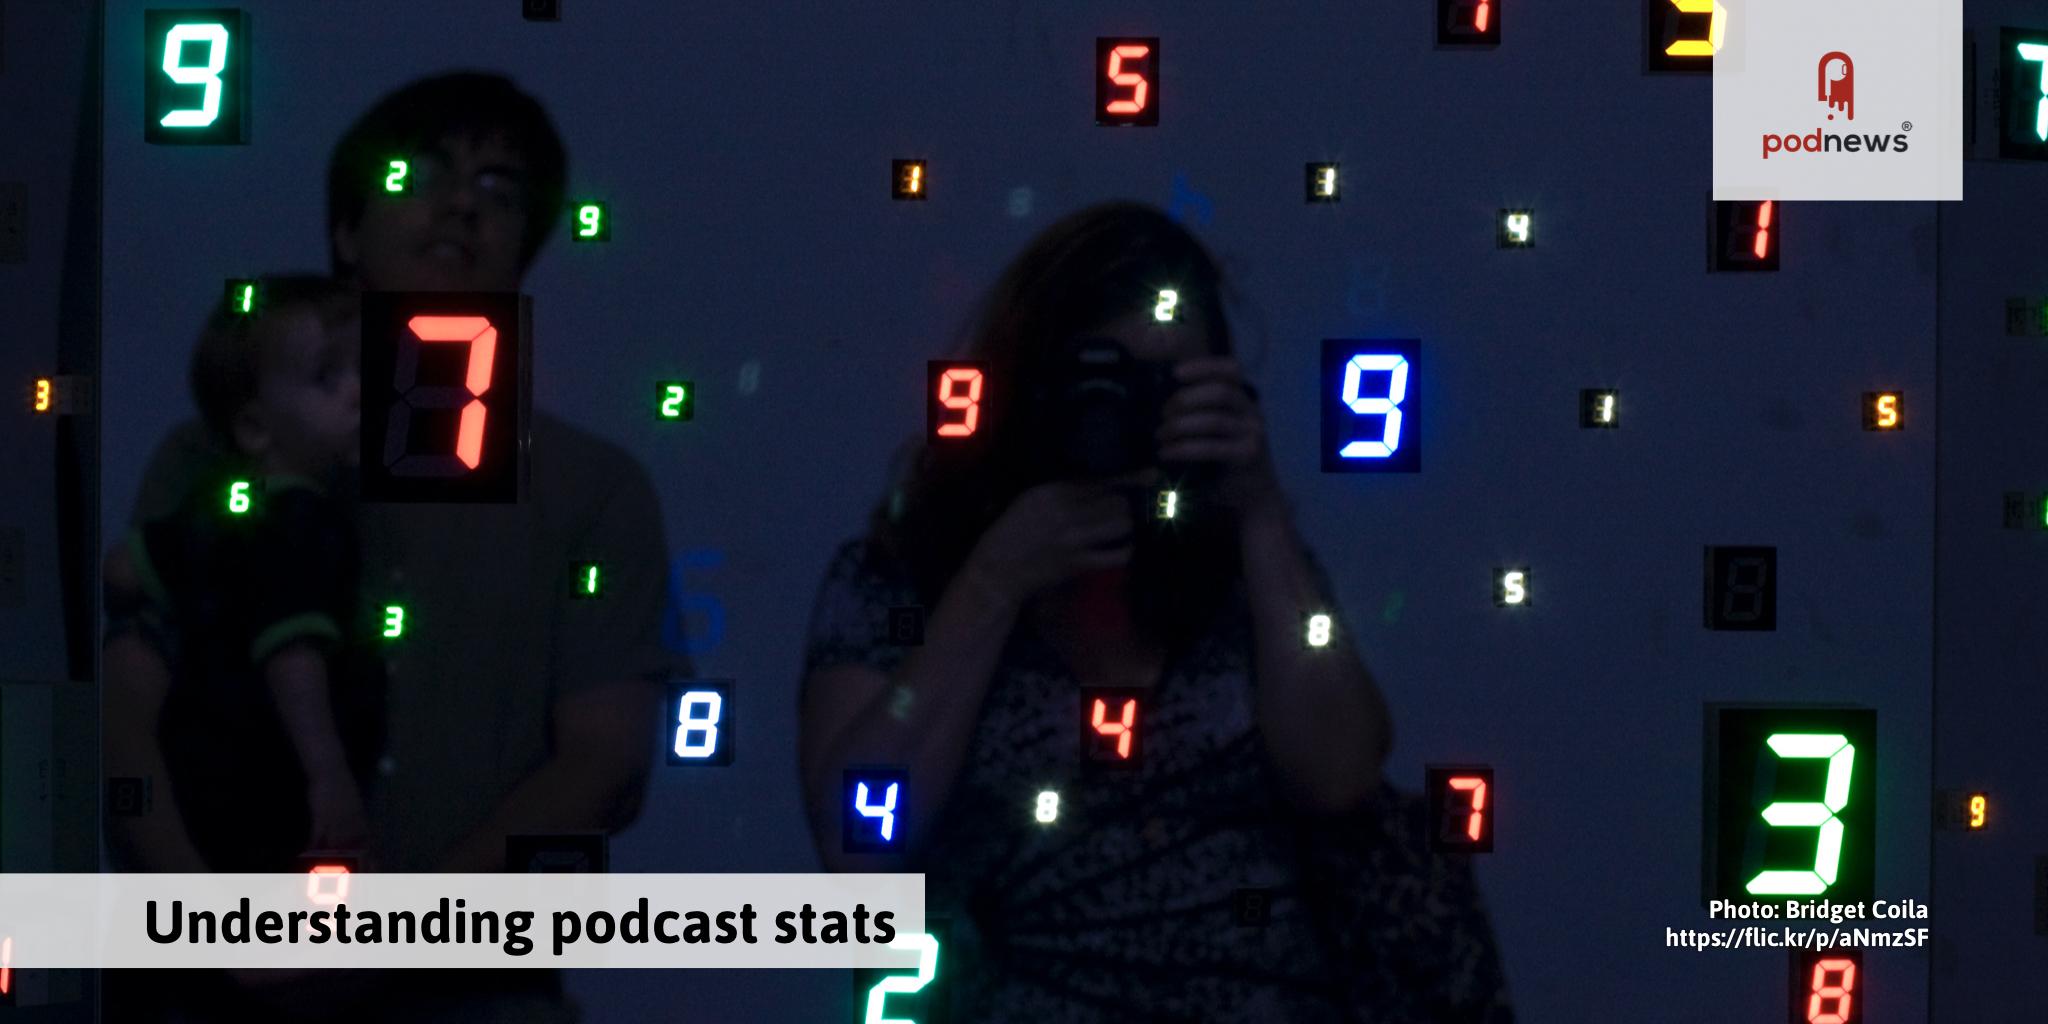 How to understand podcast stats